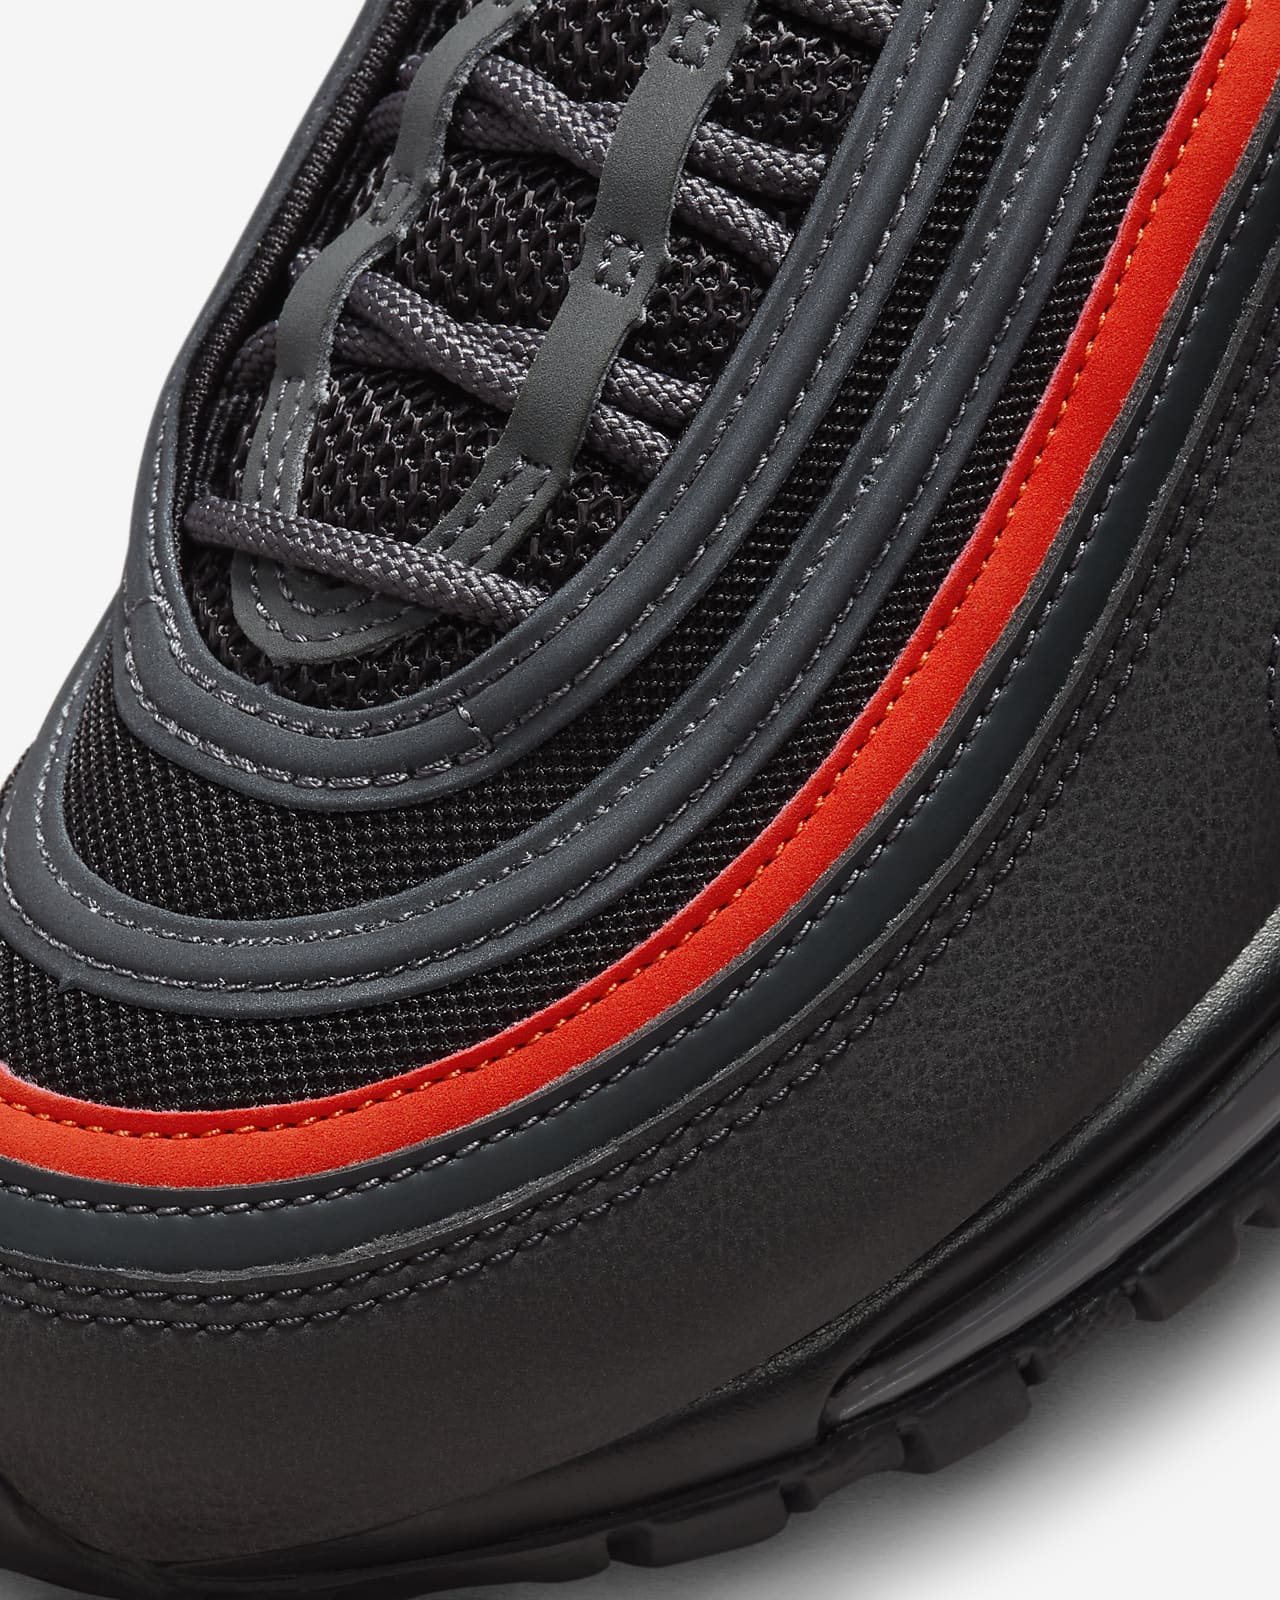 【26.5cm】NIKE airmax 97 by you Black Red